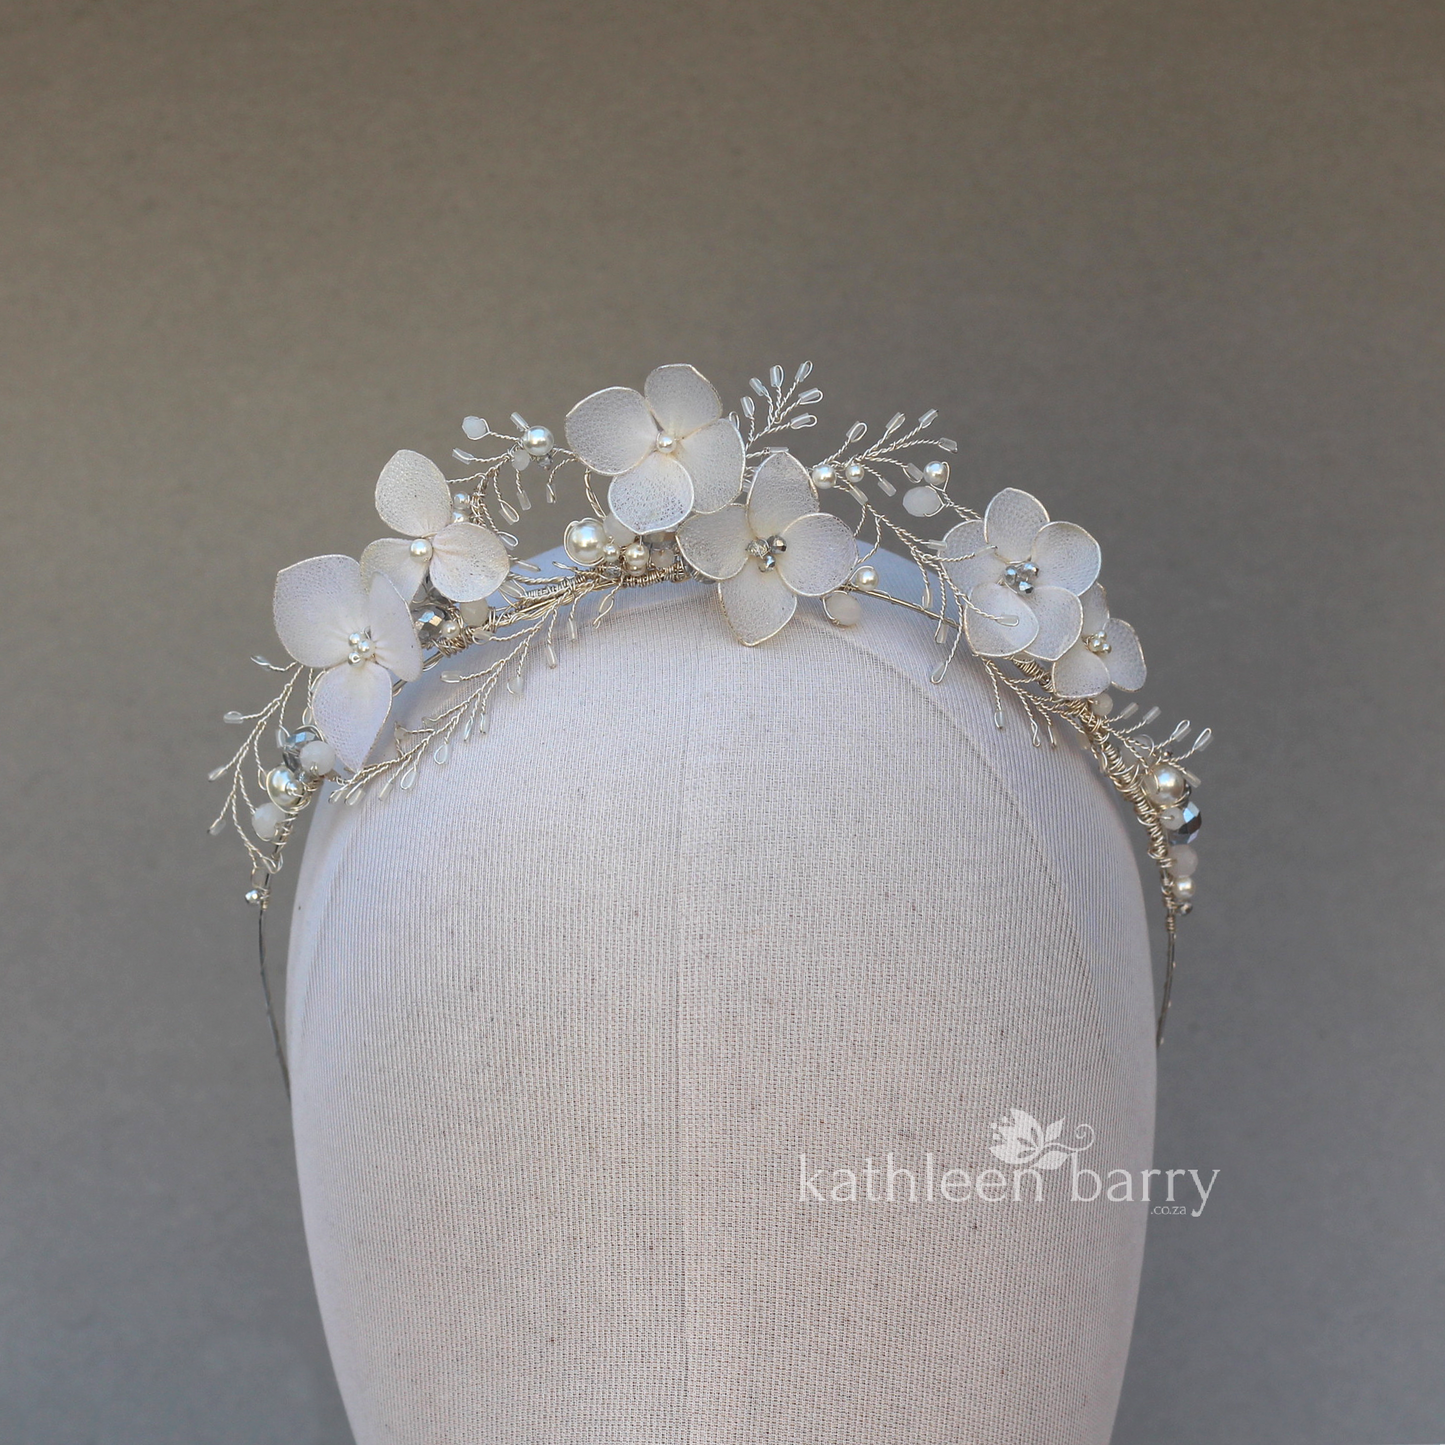 Bespoke floral crown - assorted colors available